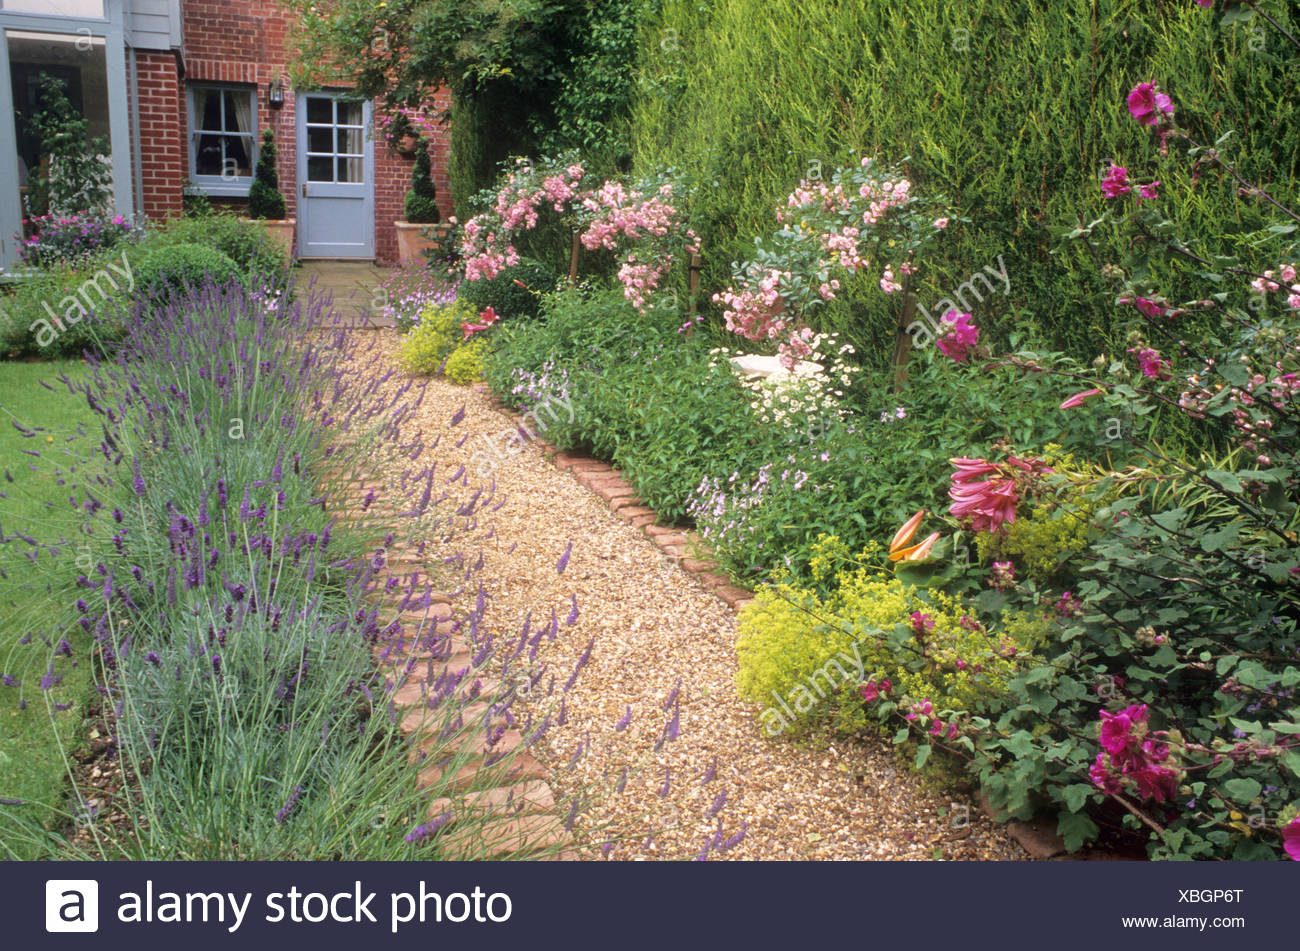 Image result for back garden with flowers pictures